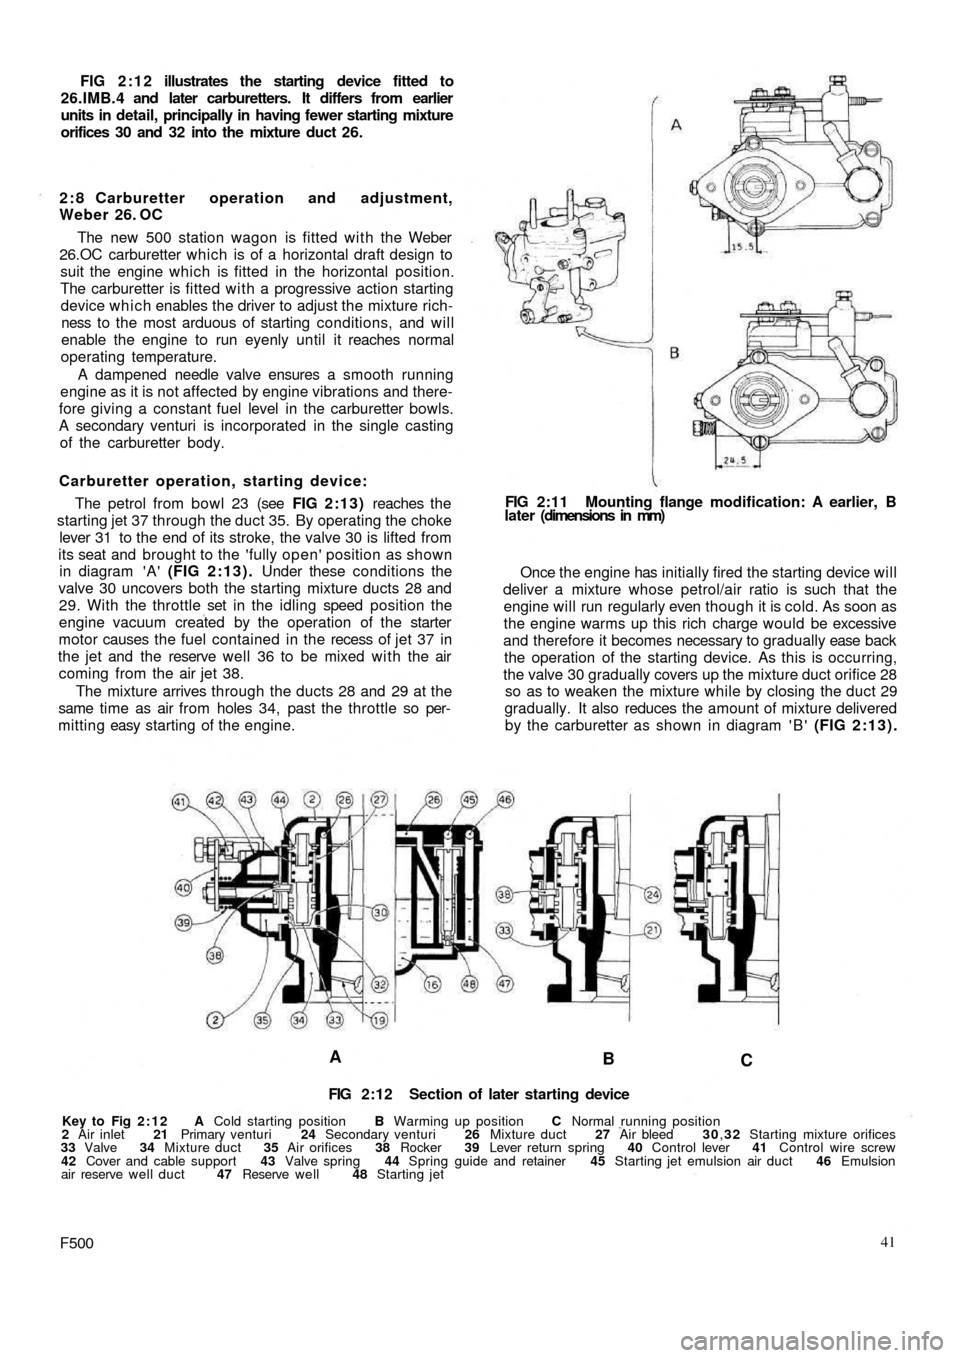 FIAT 500 1959 1.G Owners Guide FIG 2:12 illustrates the starting device fitted to
26.IMB.4 and later carburetters. It differs from earlier
units in detail, principally in having fewer starting mixture
orifices 30 and 32 into the mi